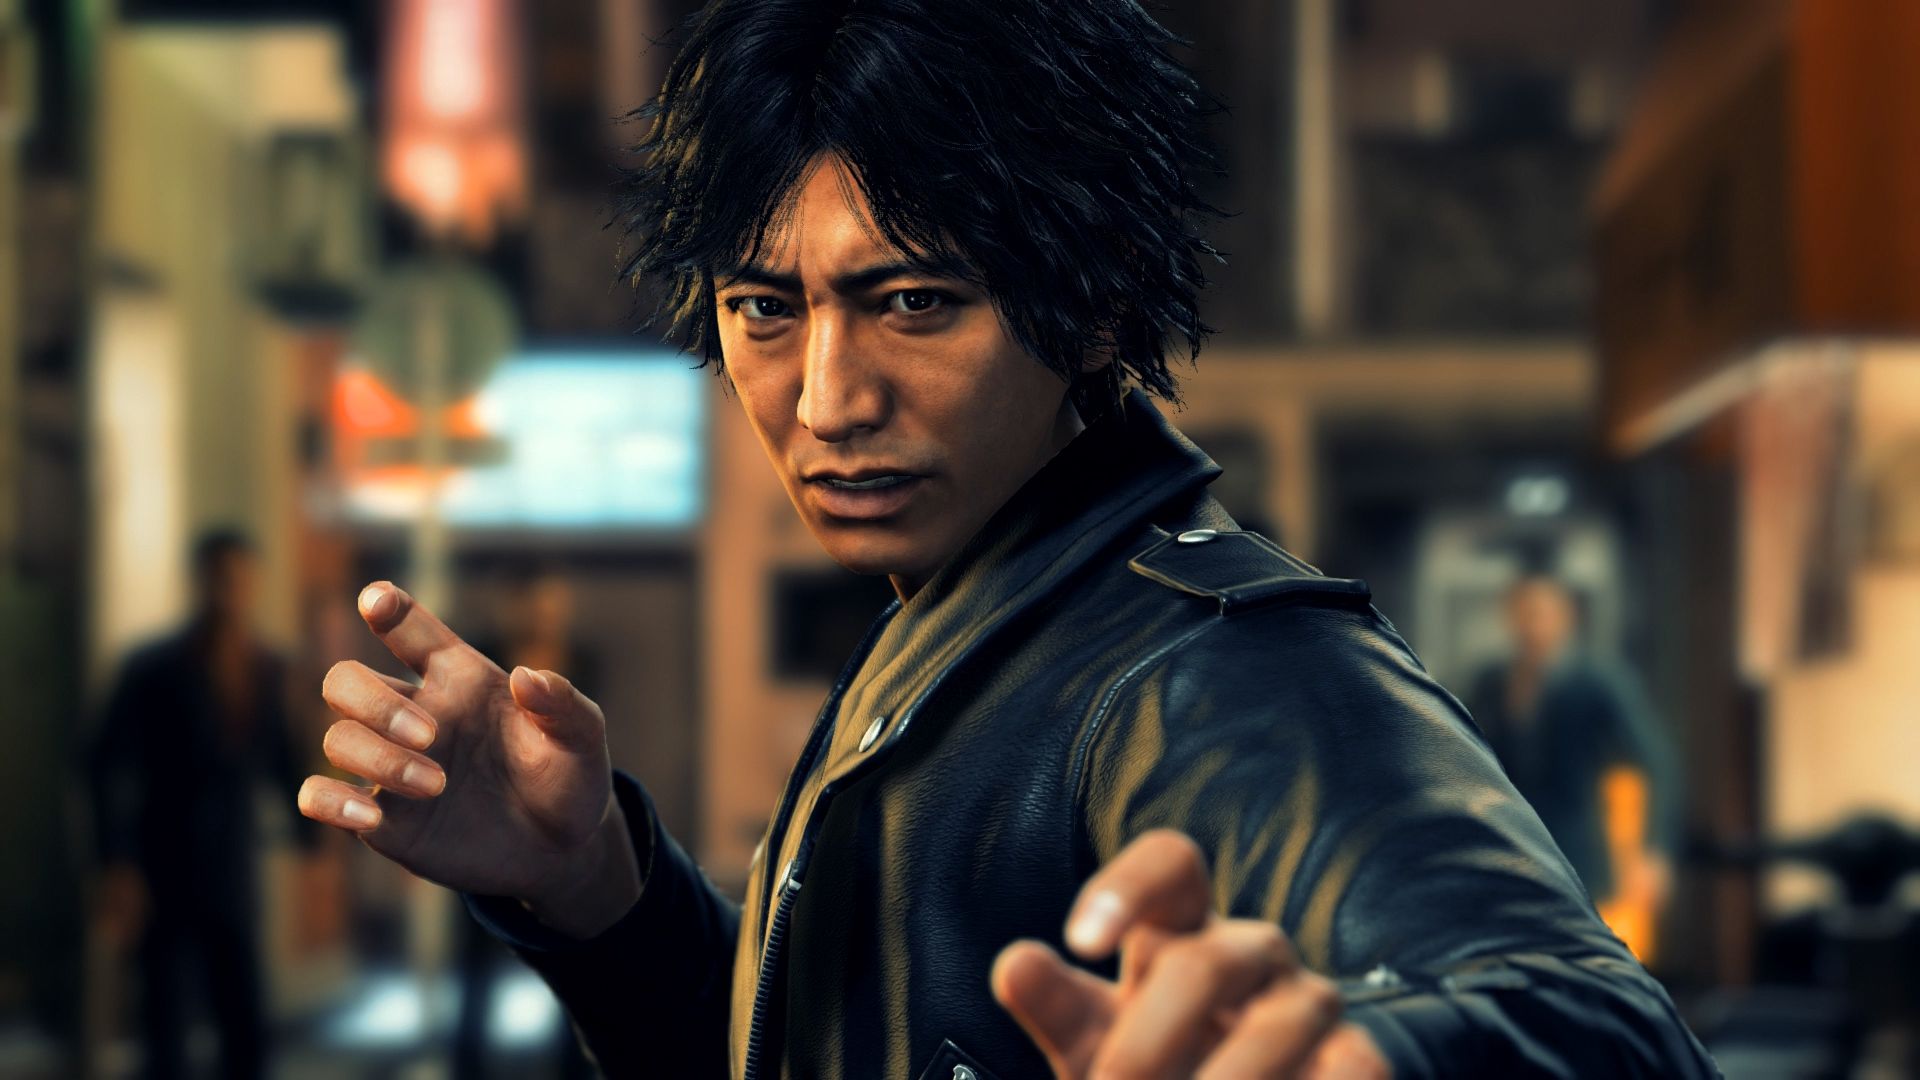 Judgment Makes A Familiar Crime Drama Feel New, The Latest From The Yakuza Devs